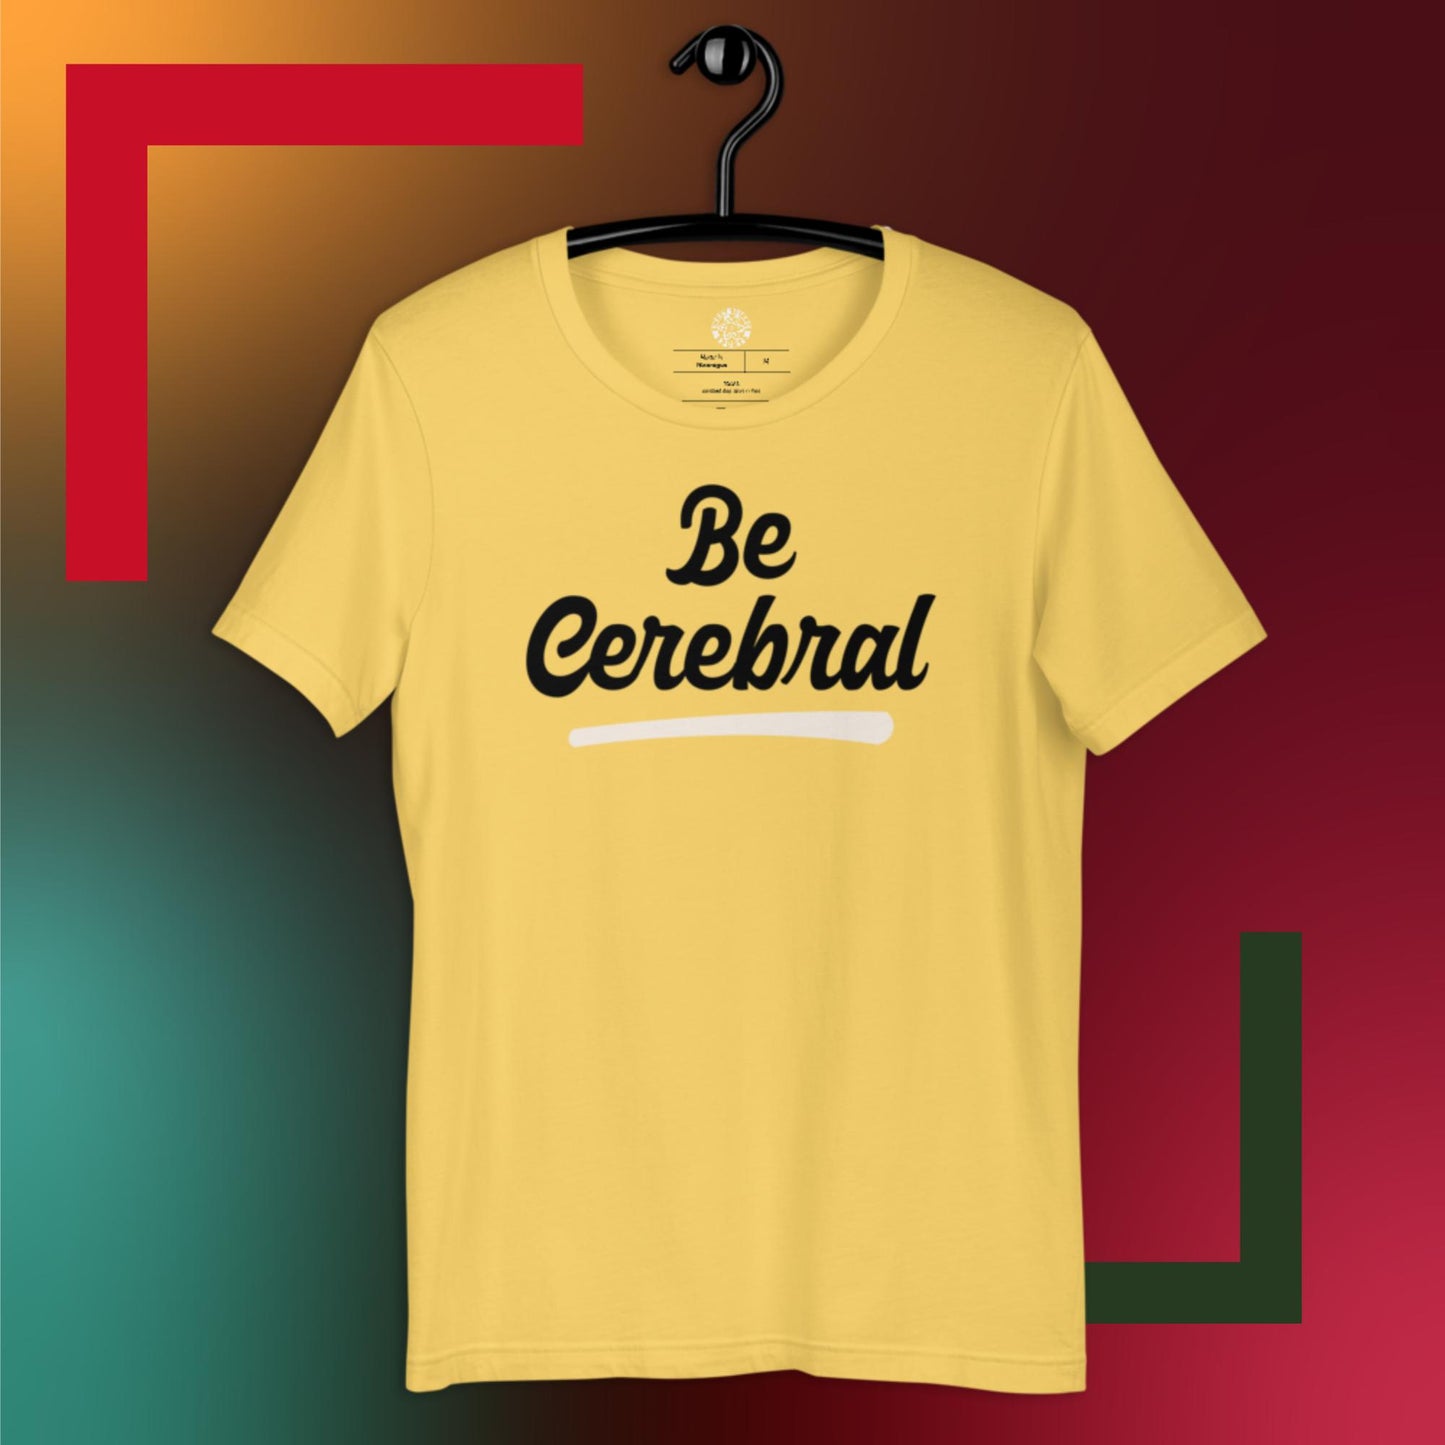 Sweet Science Sports Be Cerebral  t-shirt